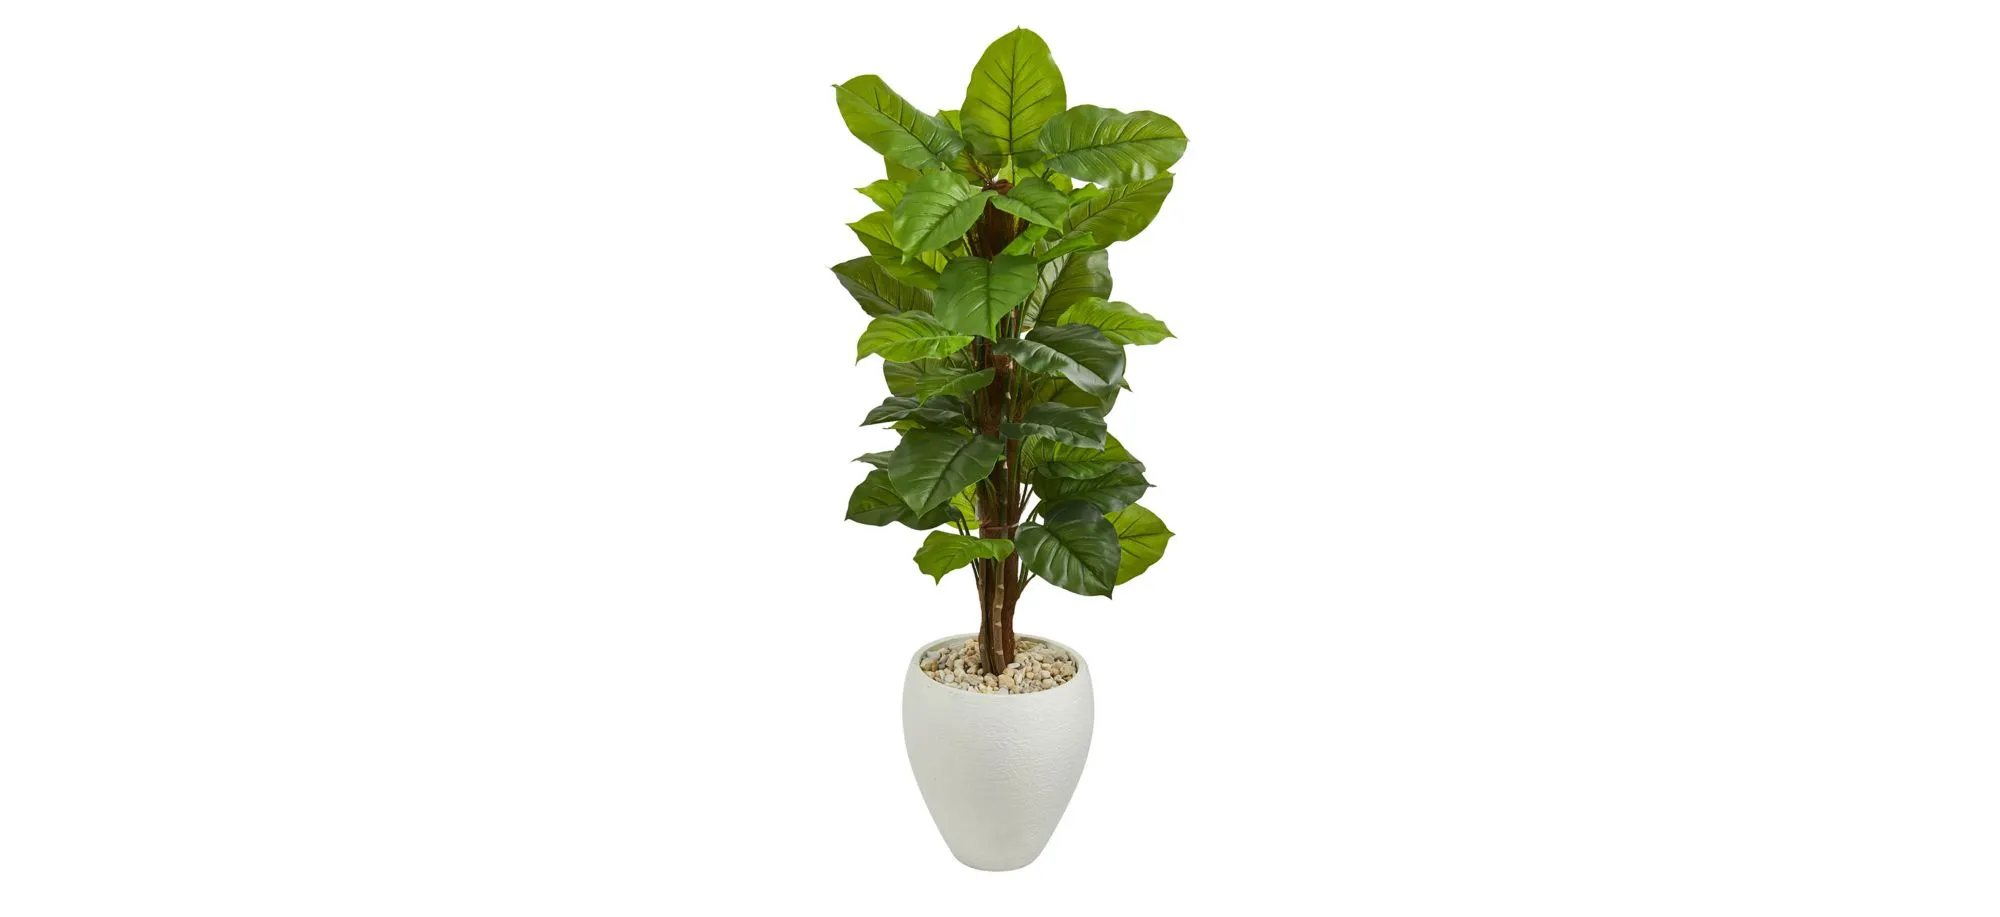 5ft. Large Leaf Philodendron Artificial Plant in Planter in Green by Bellanest